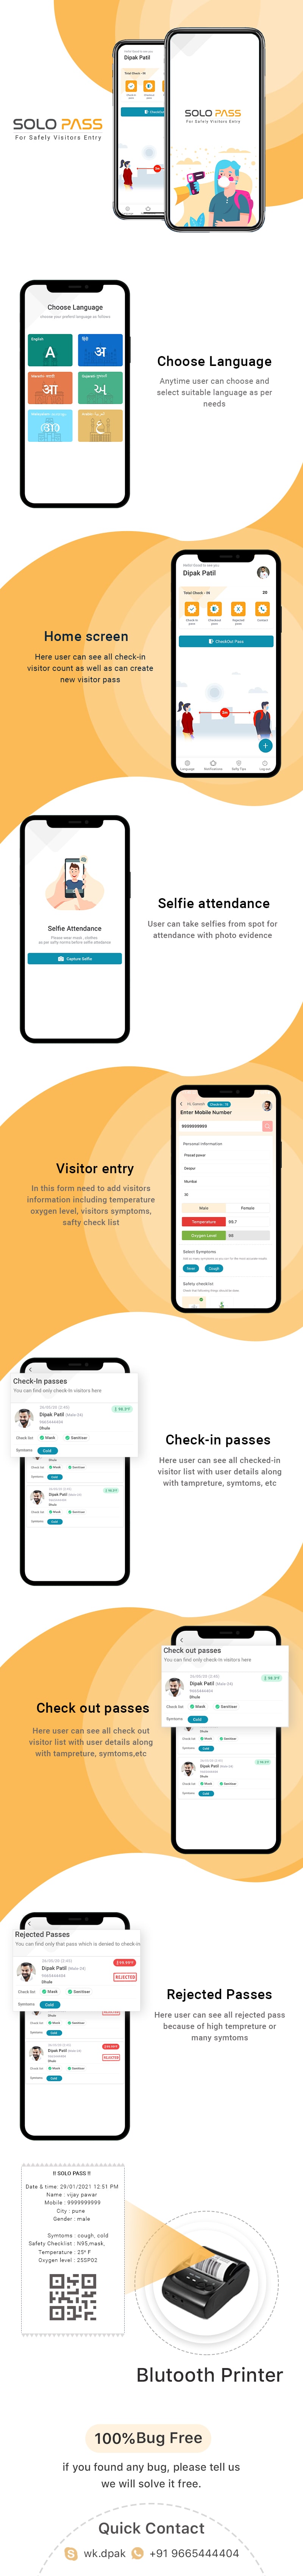 Solopass - Safty Visitor pass - 2